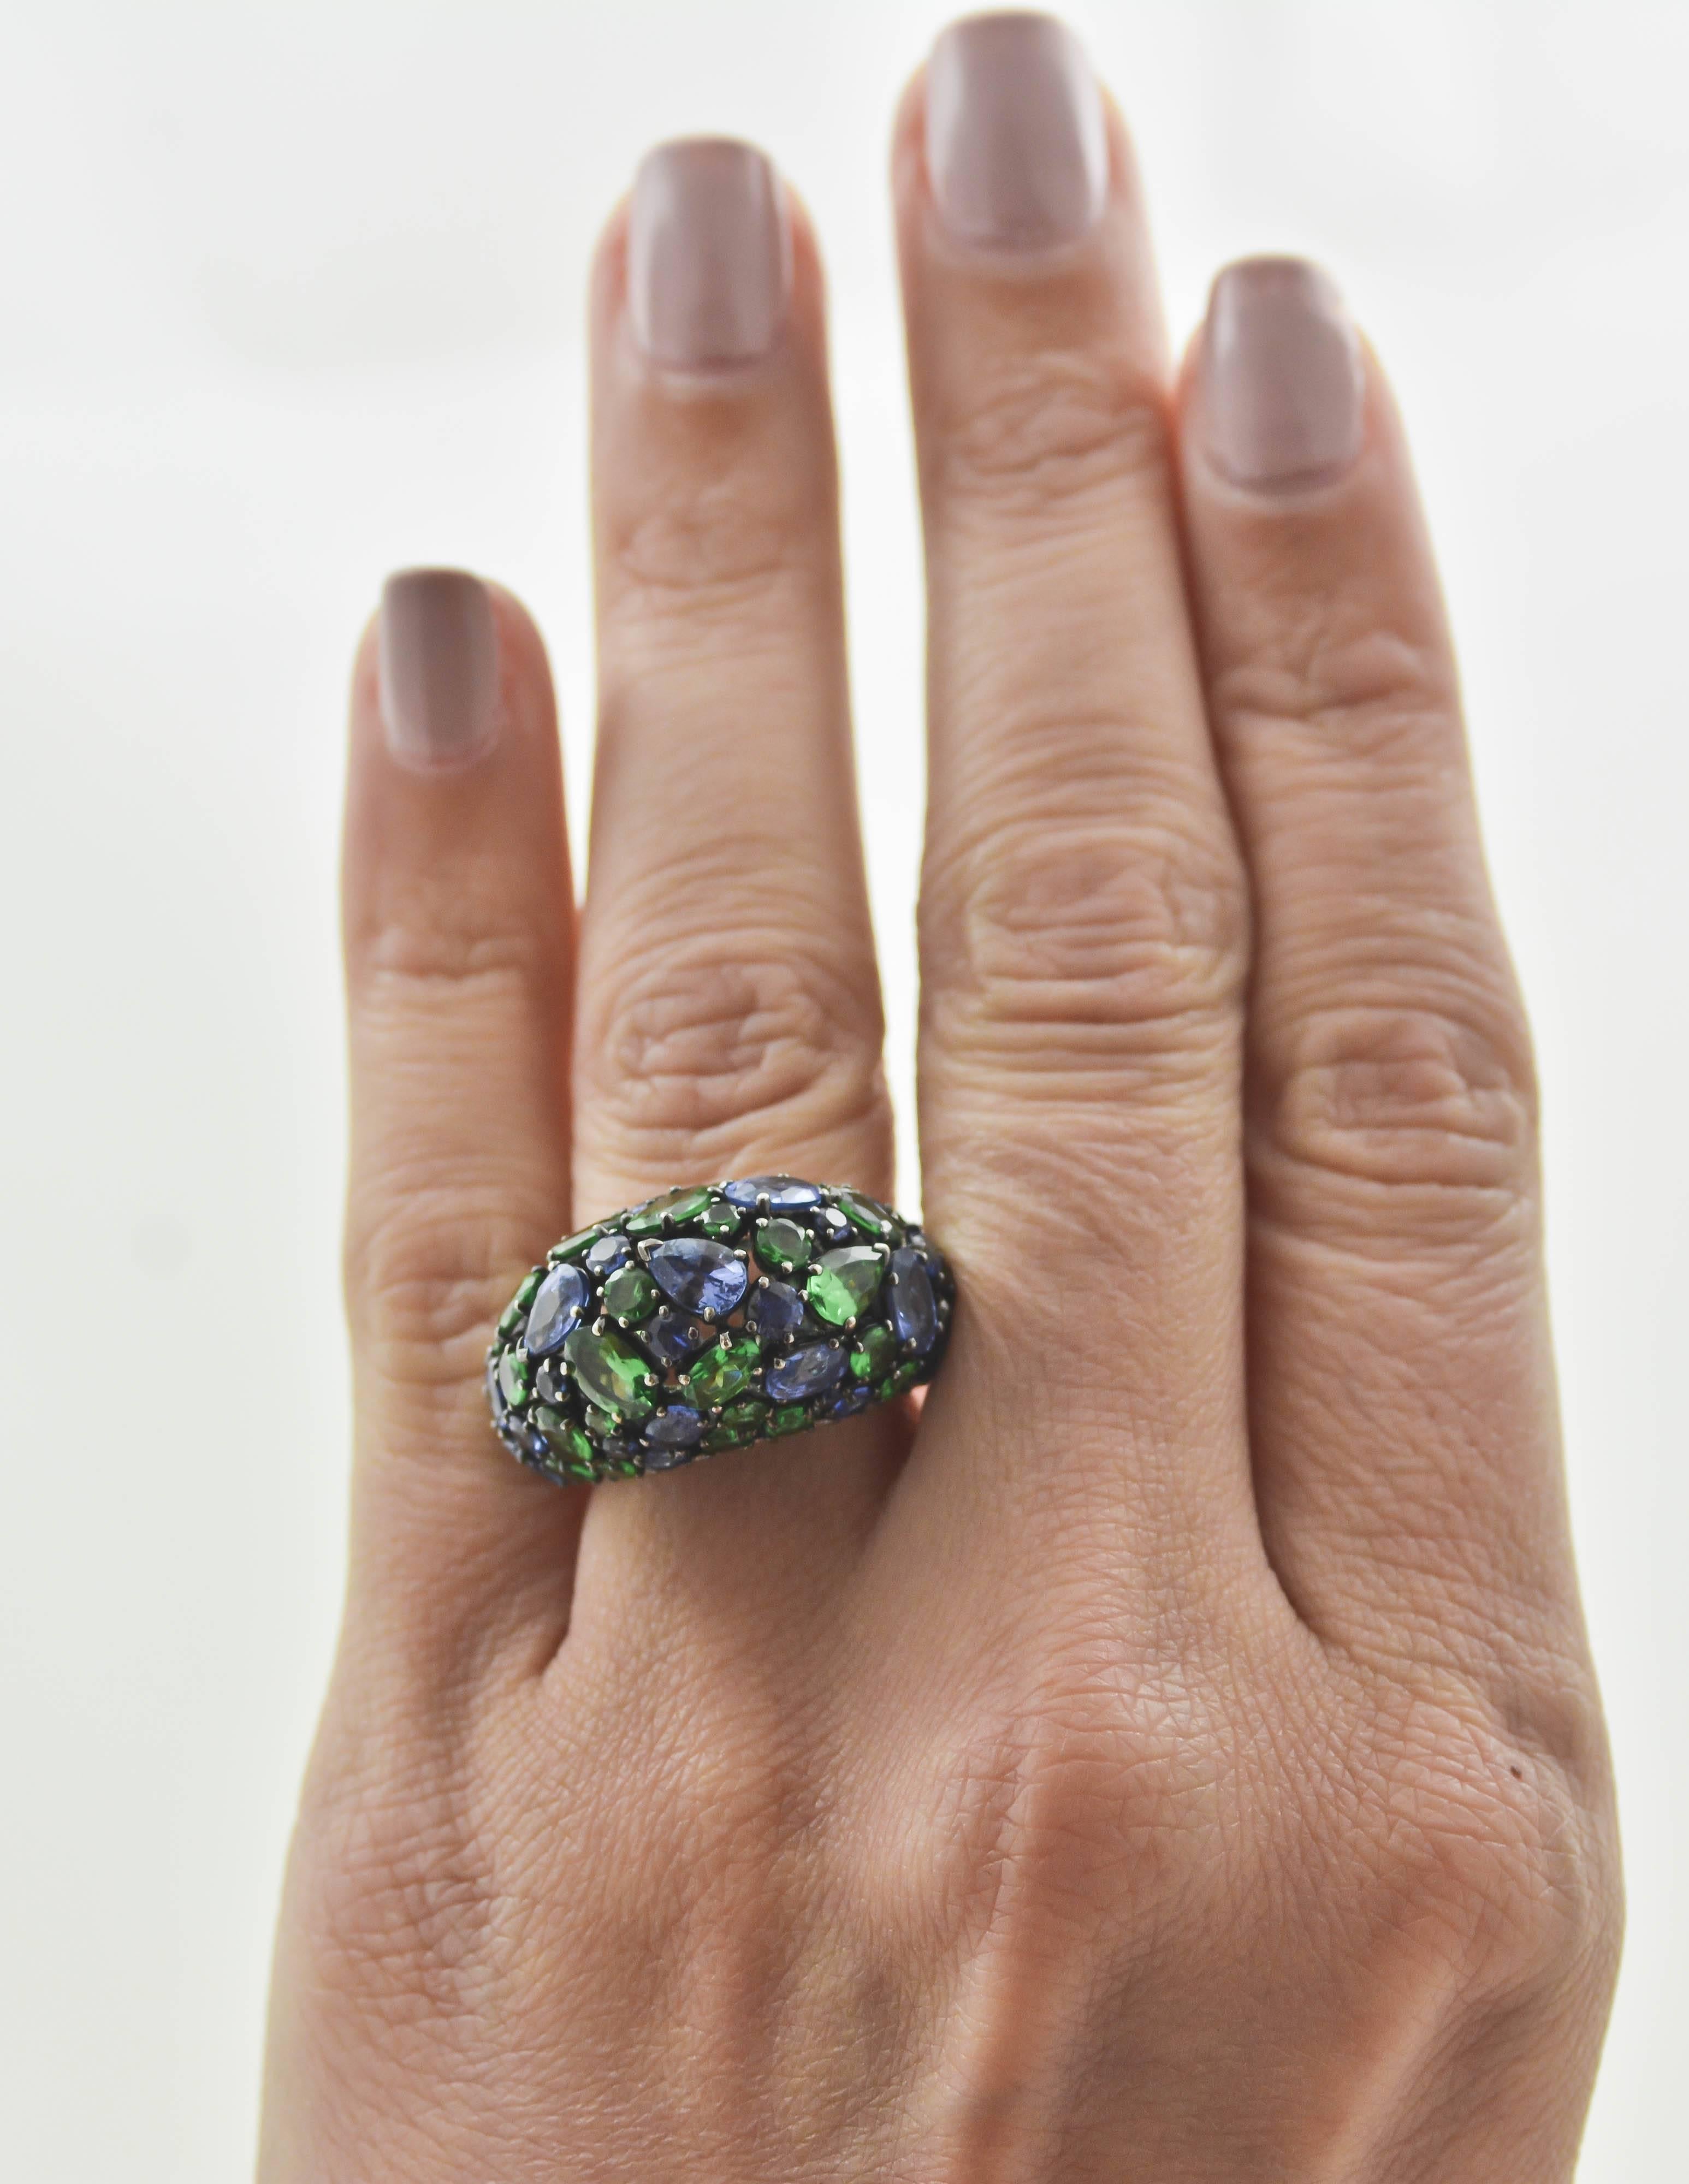 18kt white gold sets the stage in this artistic, high domed, multi-gem ring. 27 blue sapphires (4.97 carats), 31 tsavorite garnets (31.4 carats) and 34 diamonds (0.53 carats; clarity VS color G) contrast flawlessly in this colorful masterpiece. The